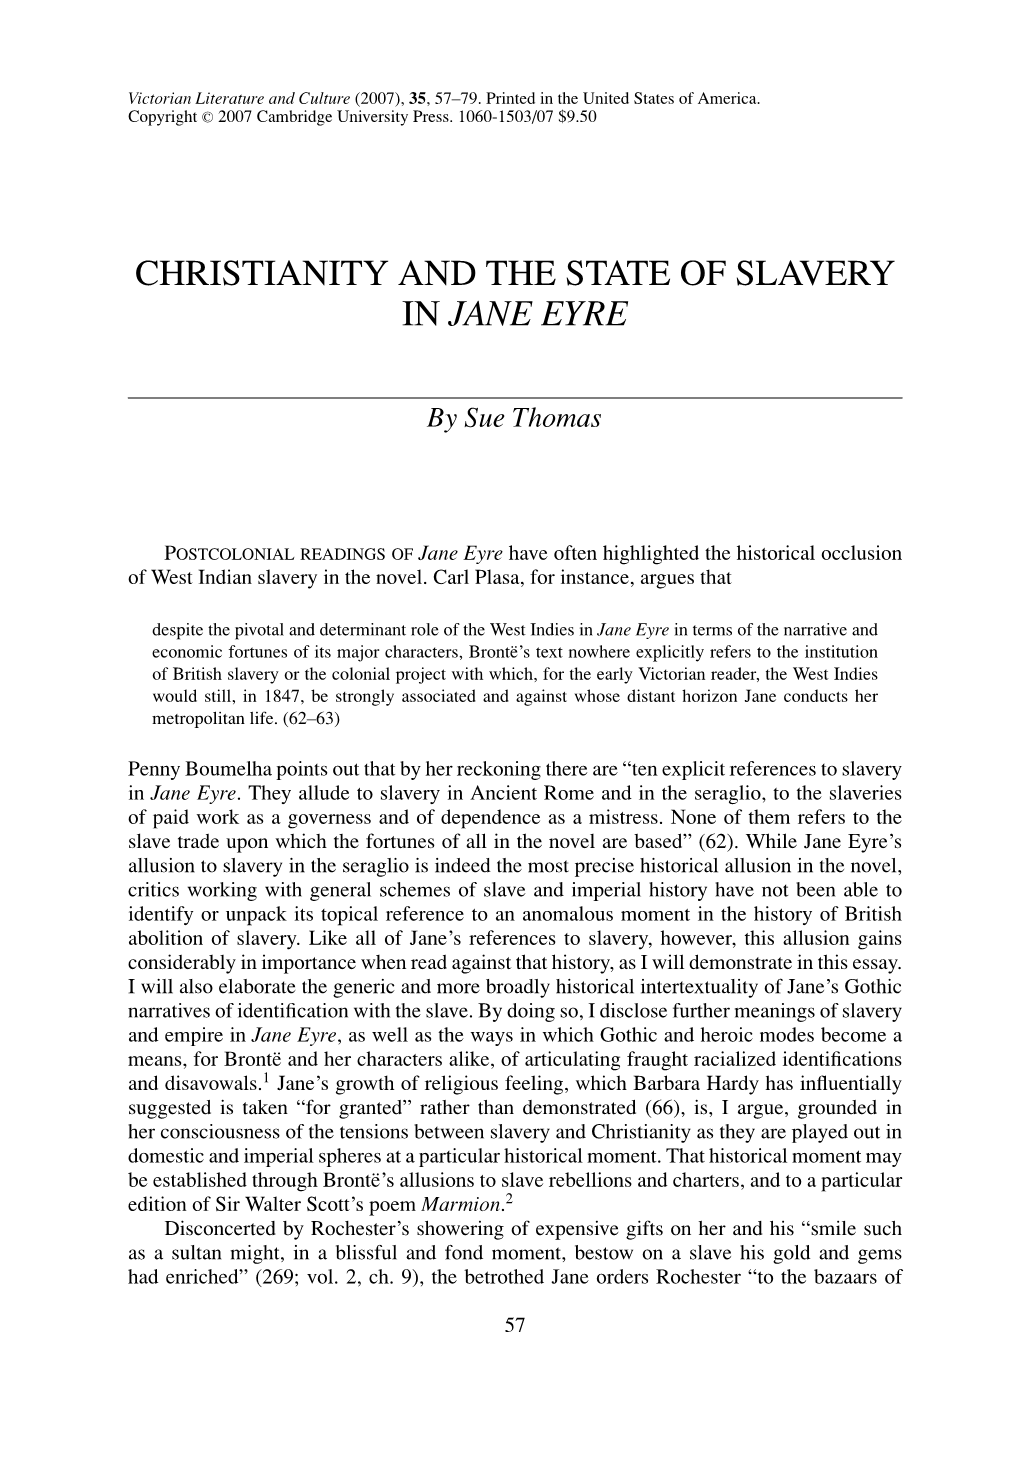 Christianity and the State of Slavery in Jane Eyre